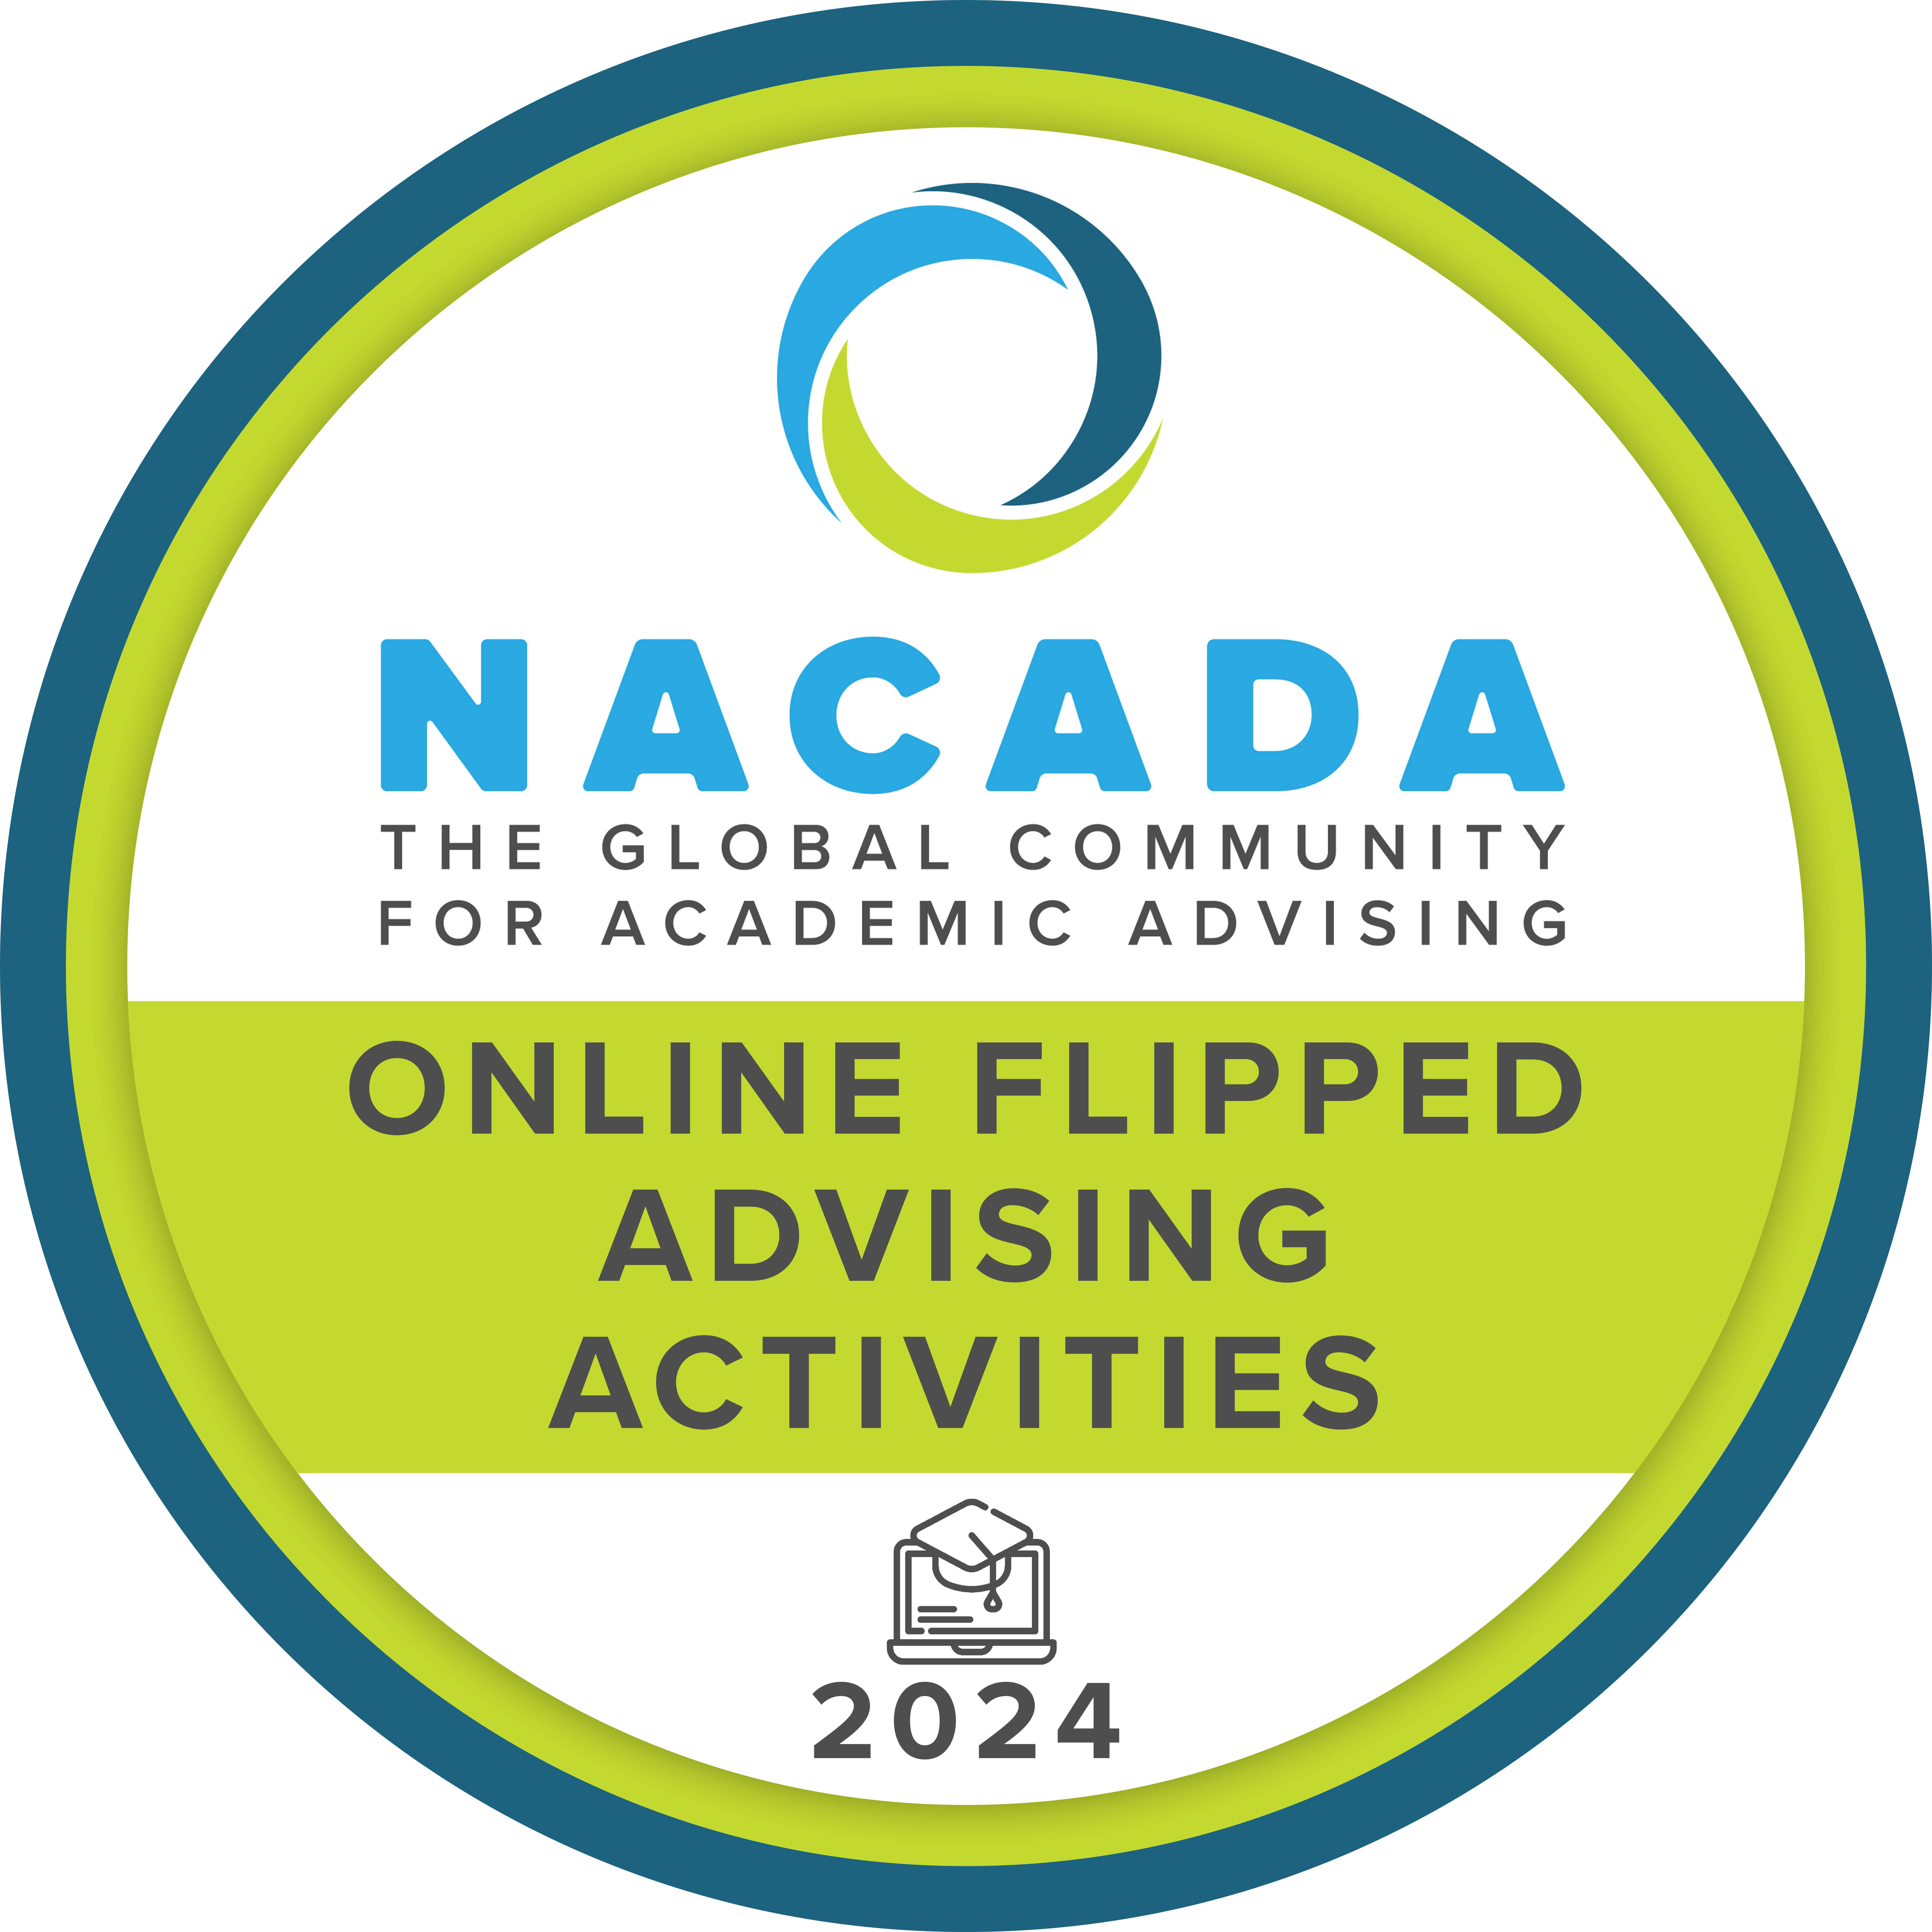 Creating Online Flipped Advising Activities Icon